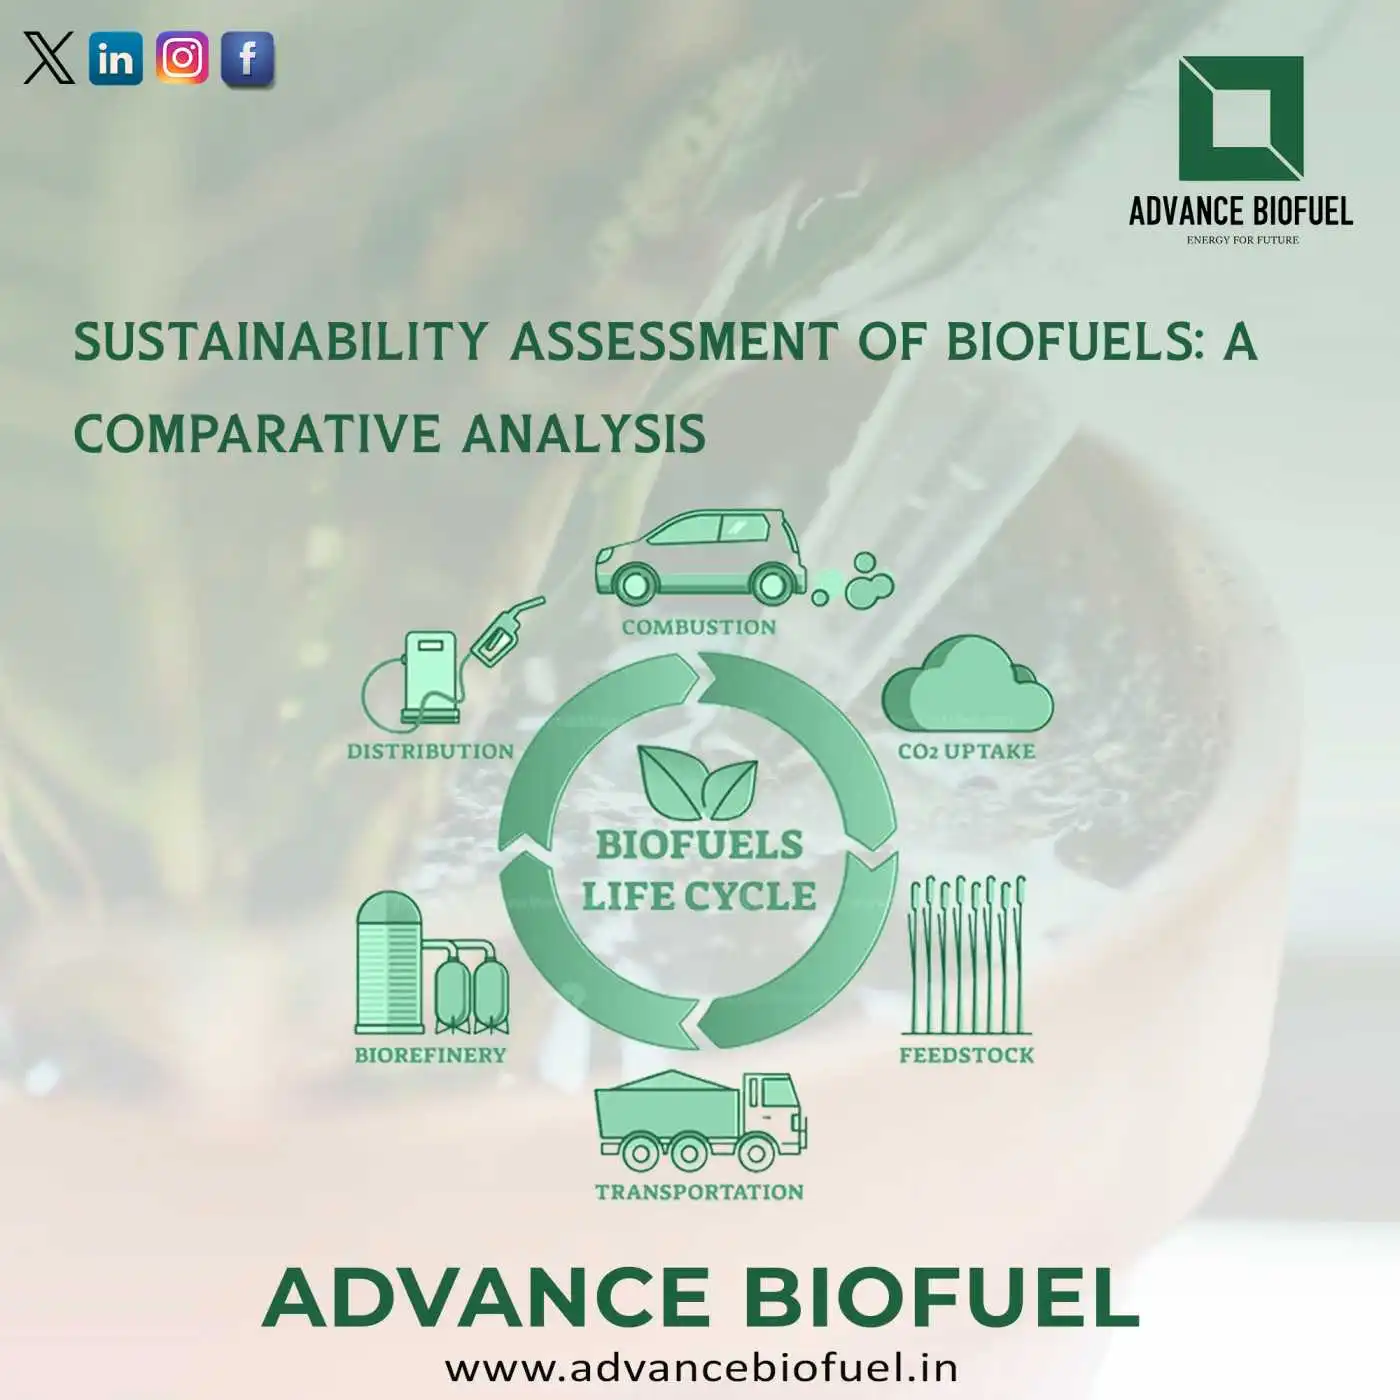 Sustainability Assessment of Biofuels: A Comparative Analysis